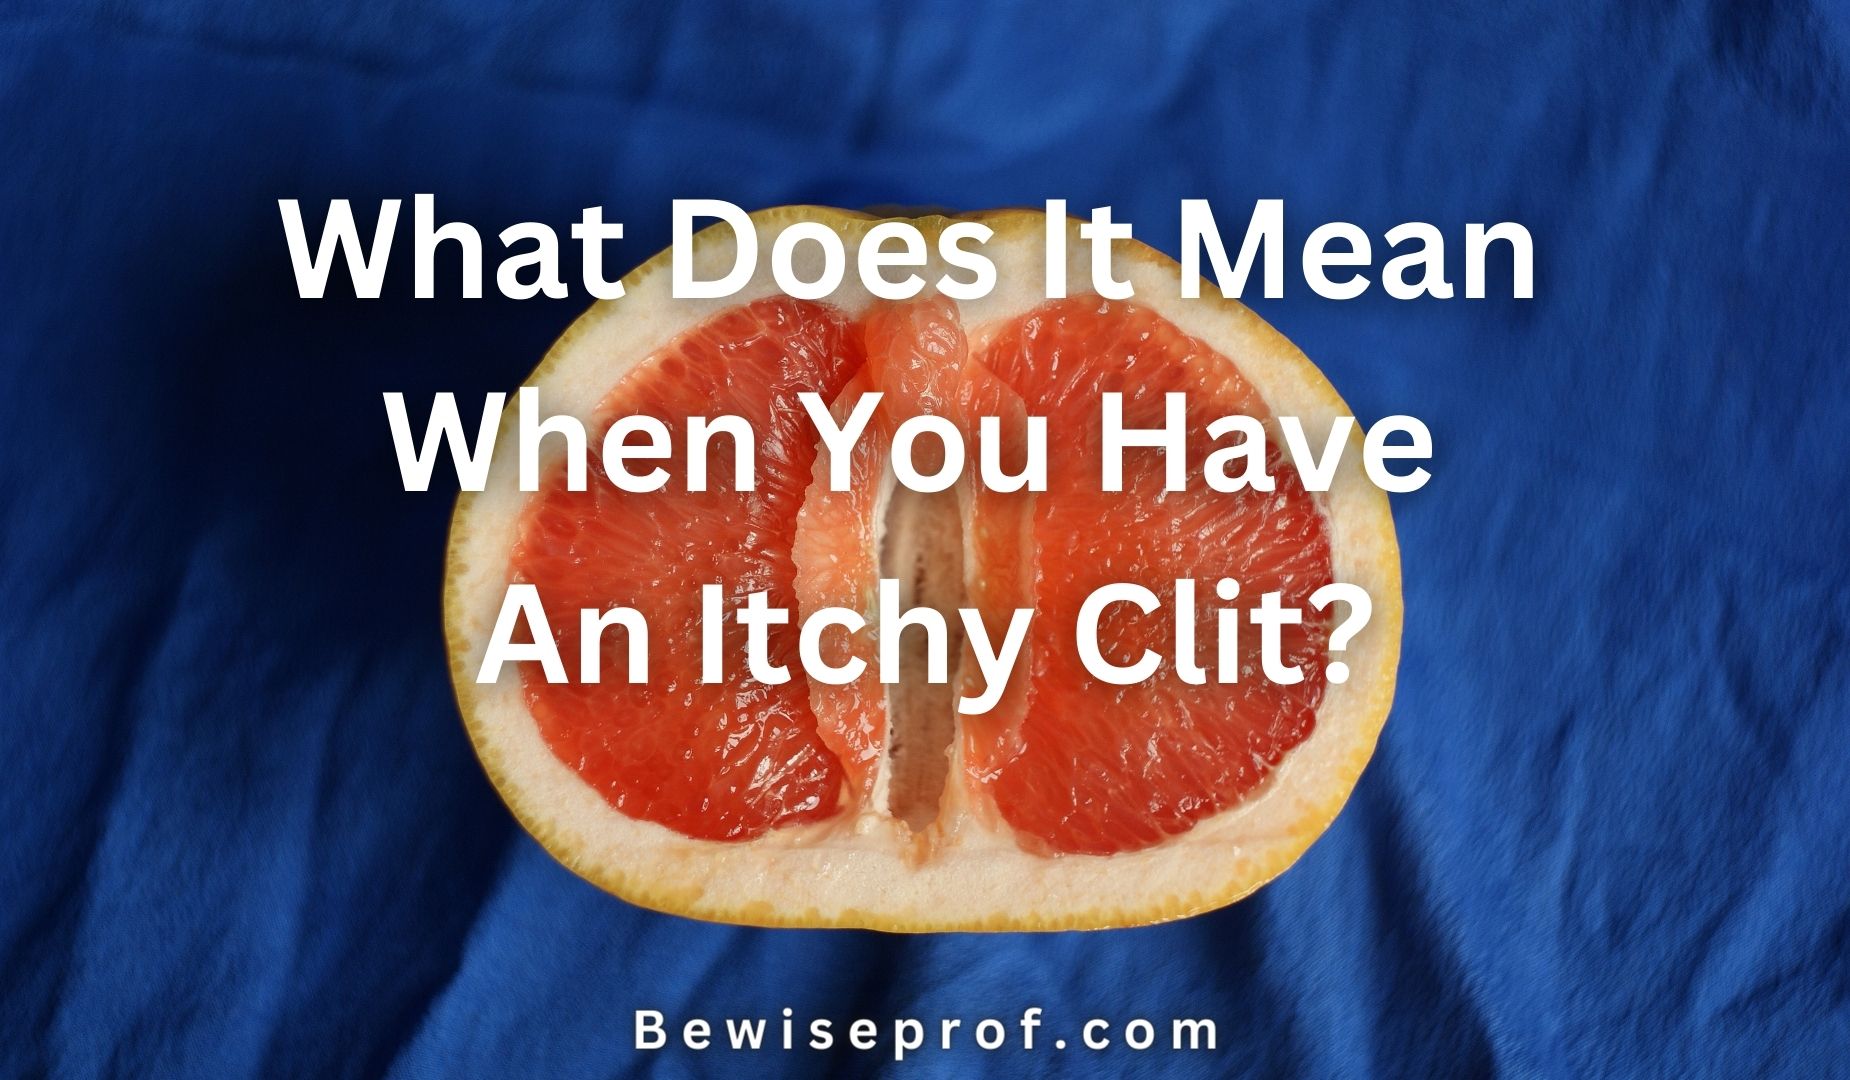 What Does It Mean When You Have An Itchy Clit?